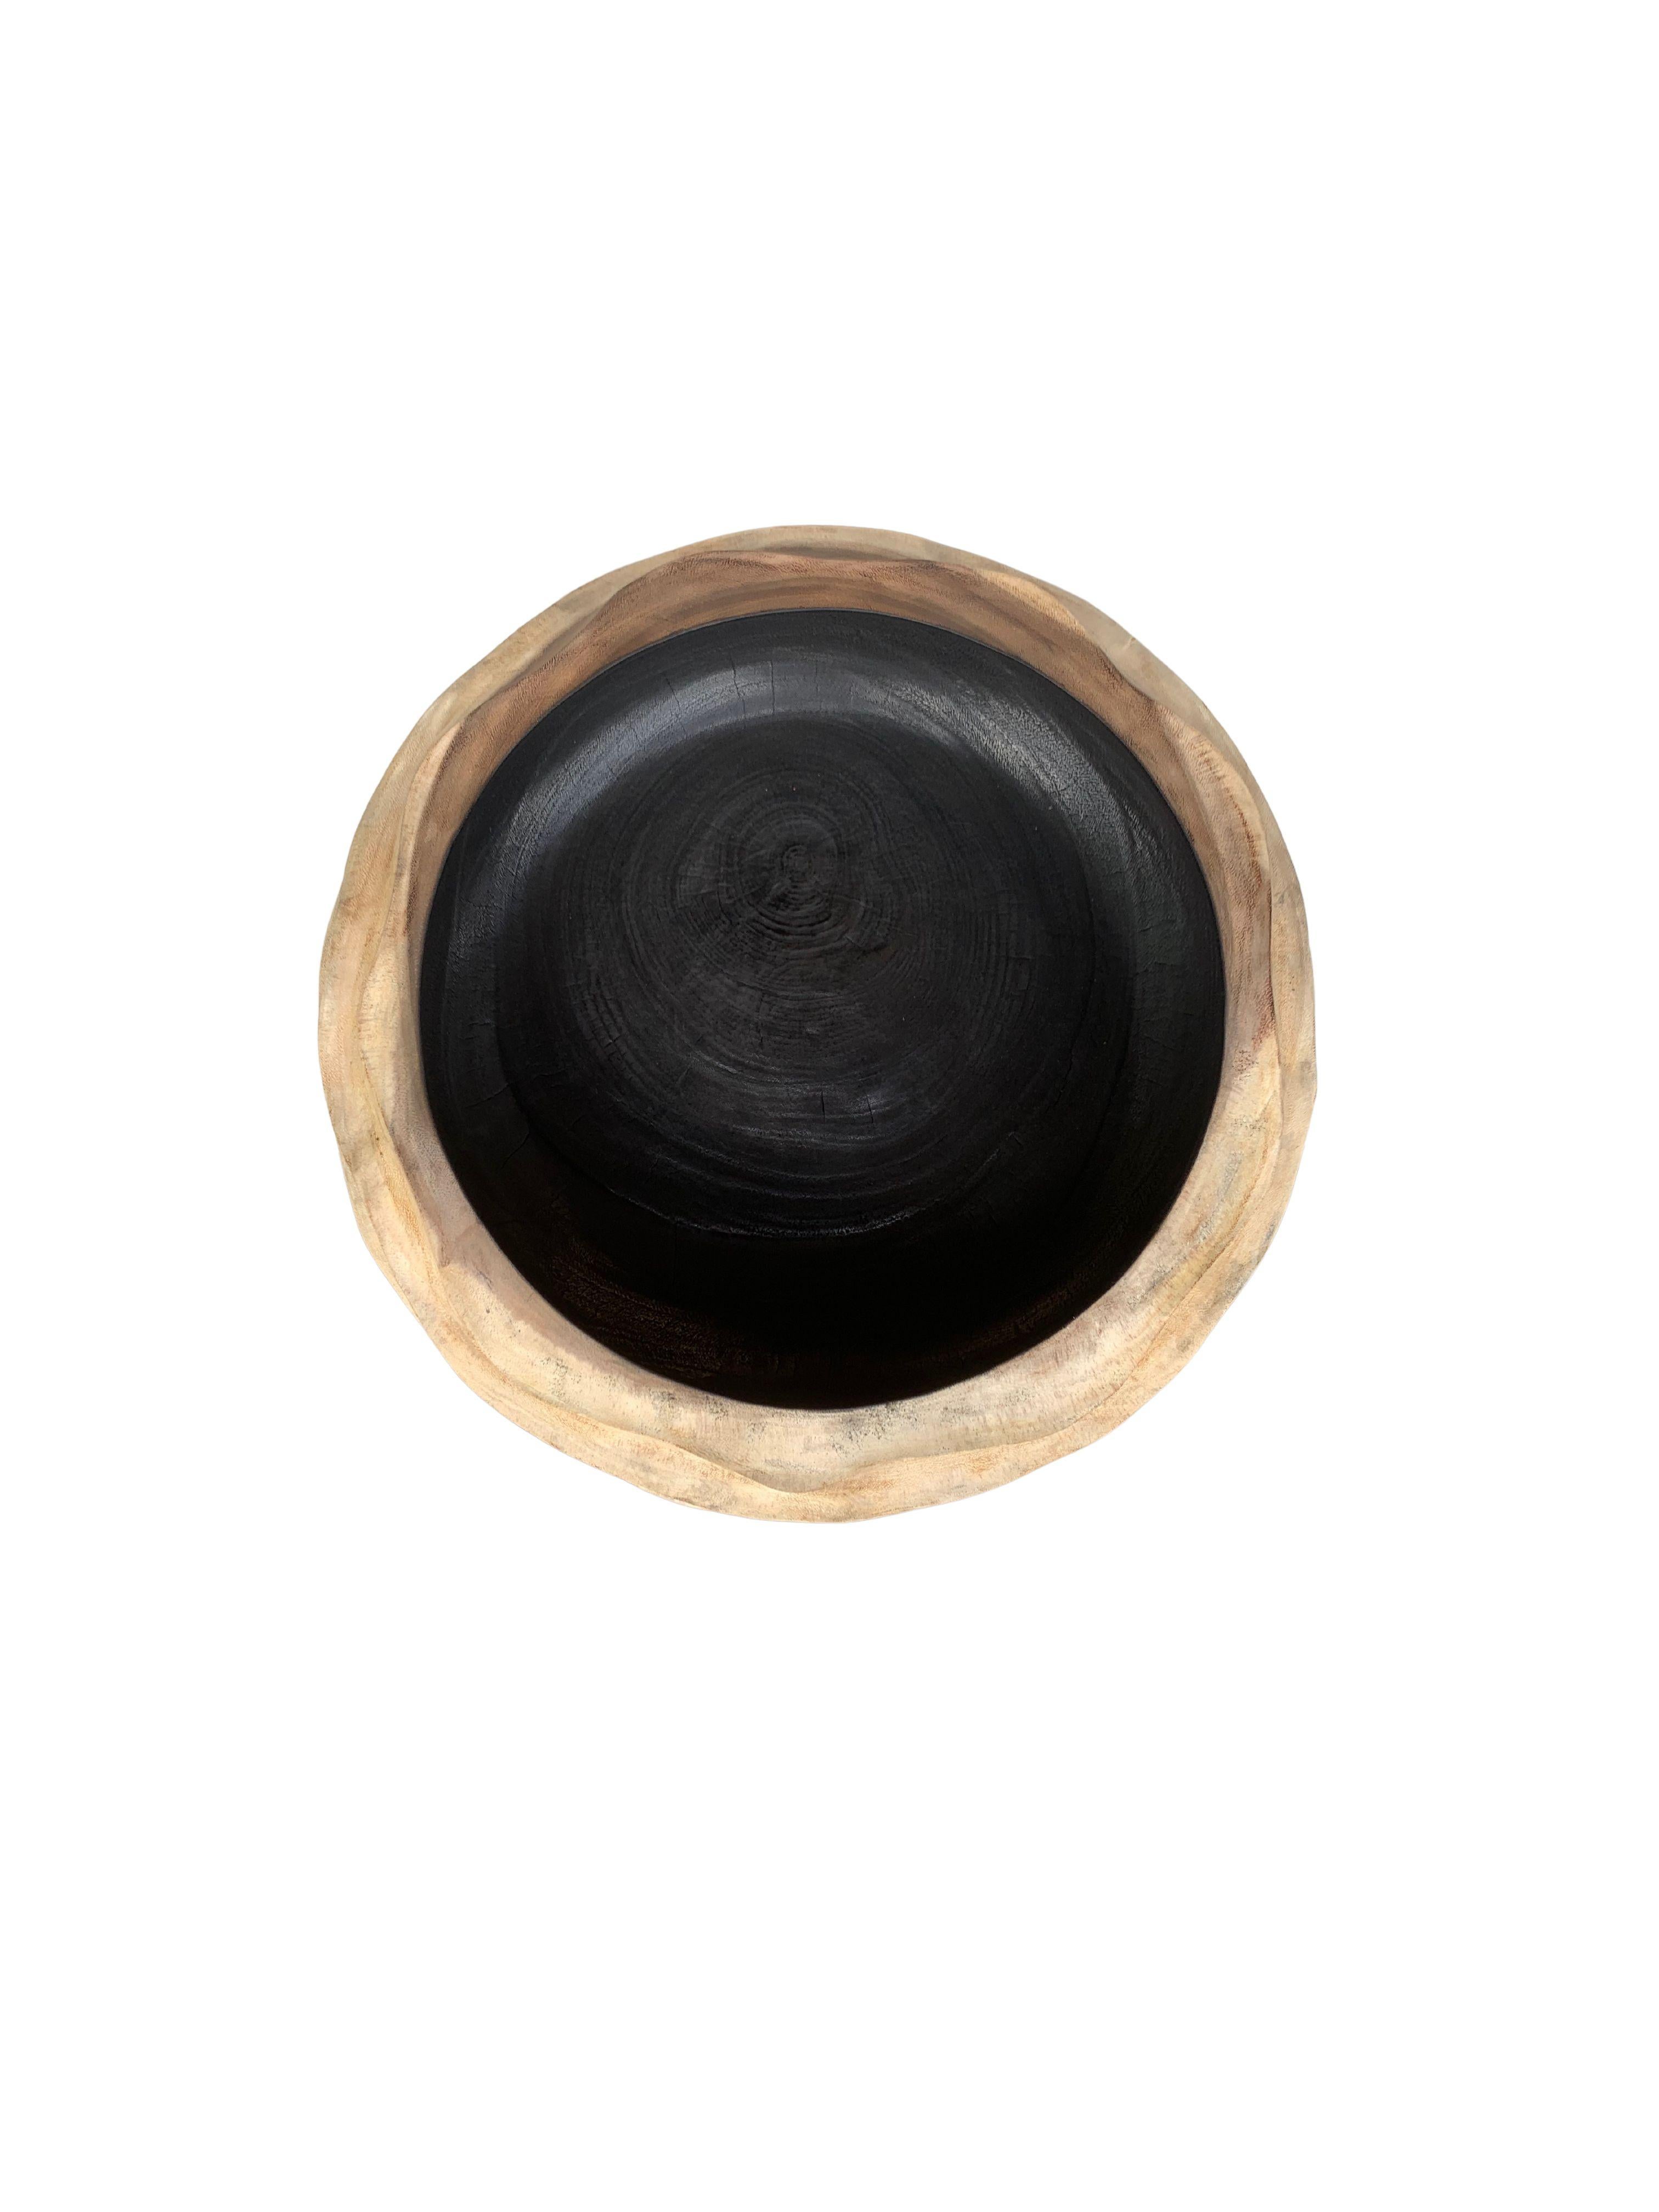 Organic Modern Solid Mango Wood Bowl with Burnt & Natural Finish  For Sale